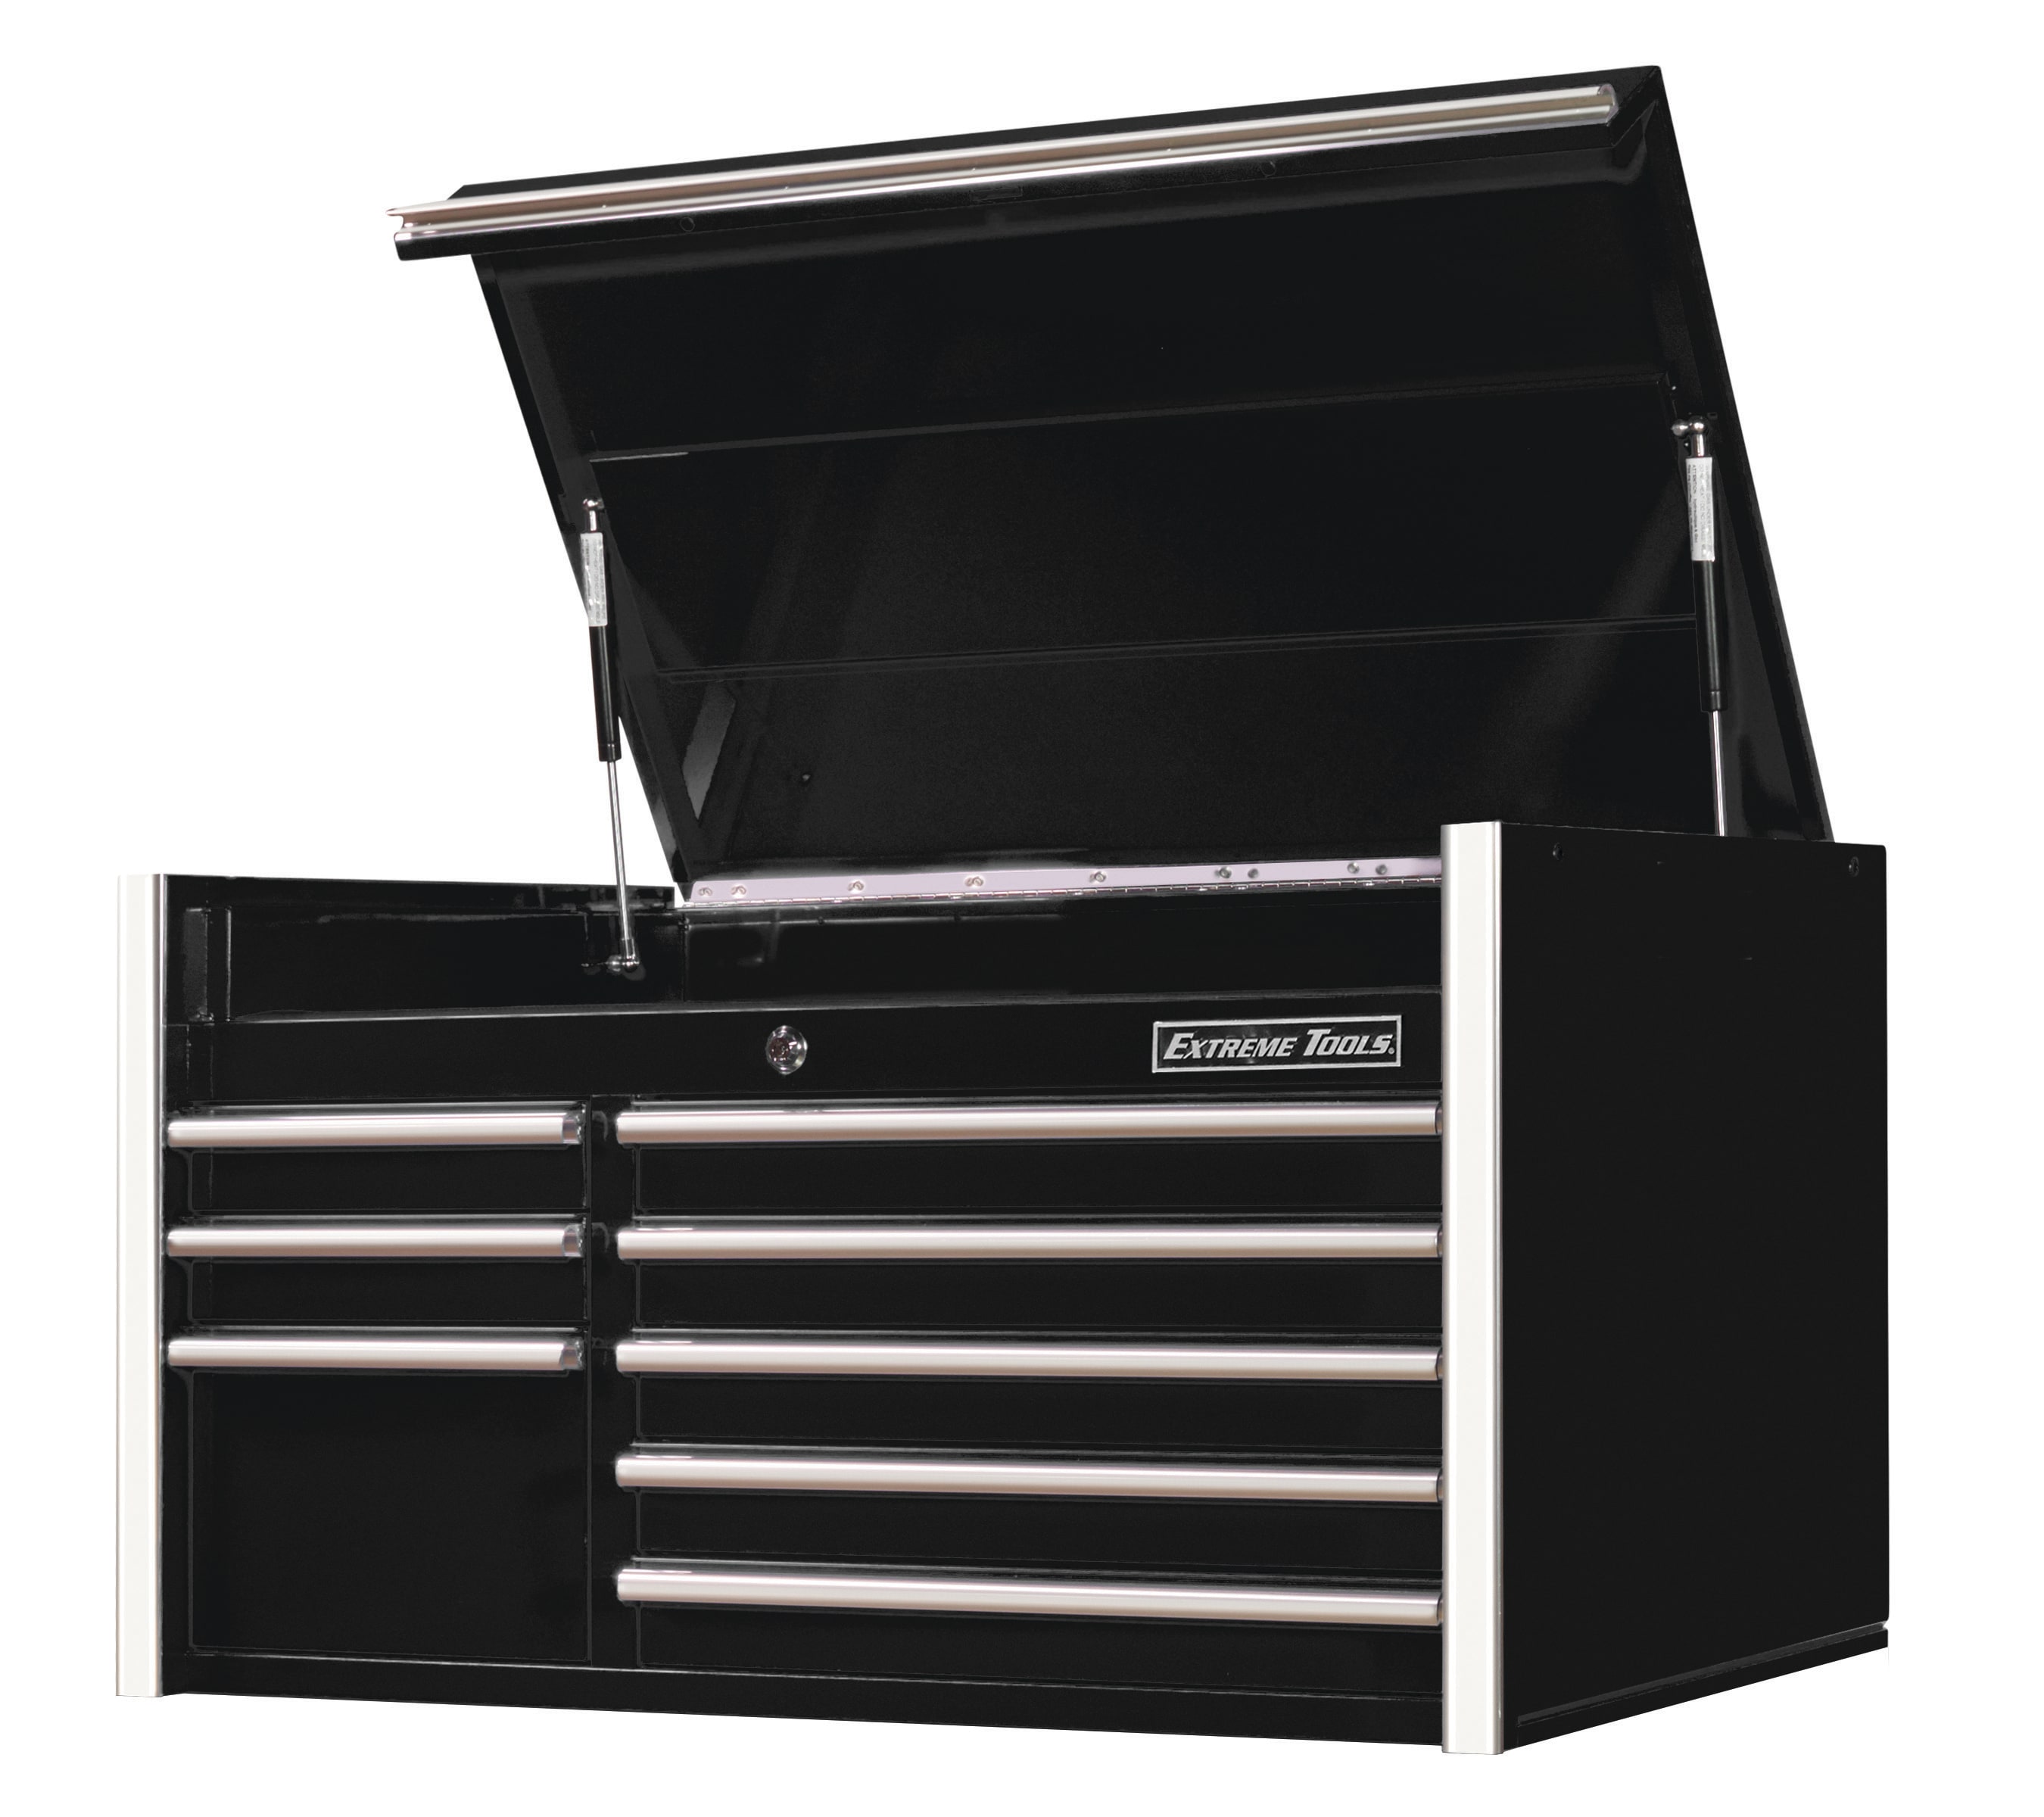 Extreme Tools RX 41 in. 8 -Drawer Top Tool Chest in Black, Black gloss powder coat finish and chrome anodized drawer pulls -  RX412508CHBK